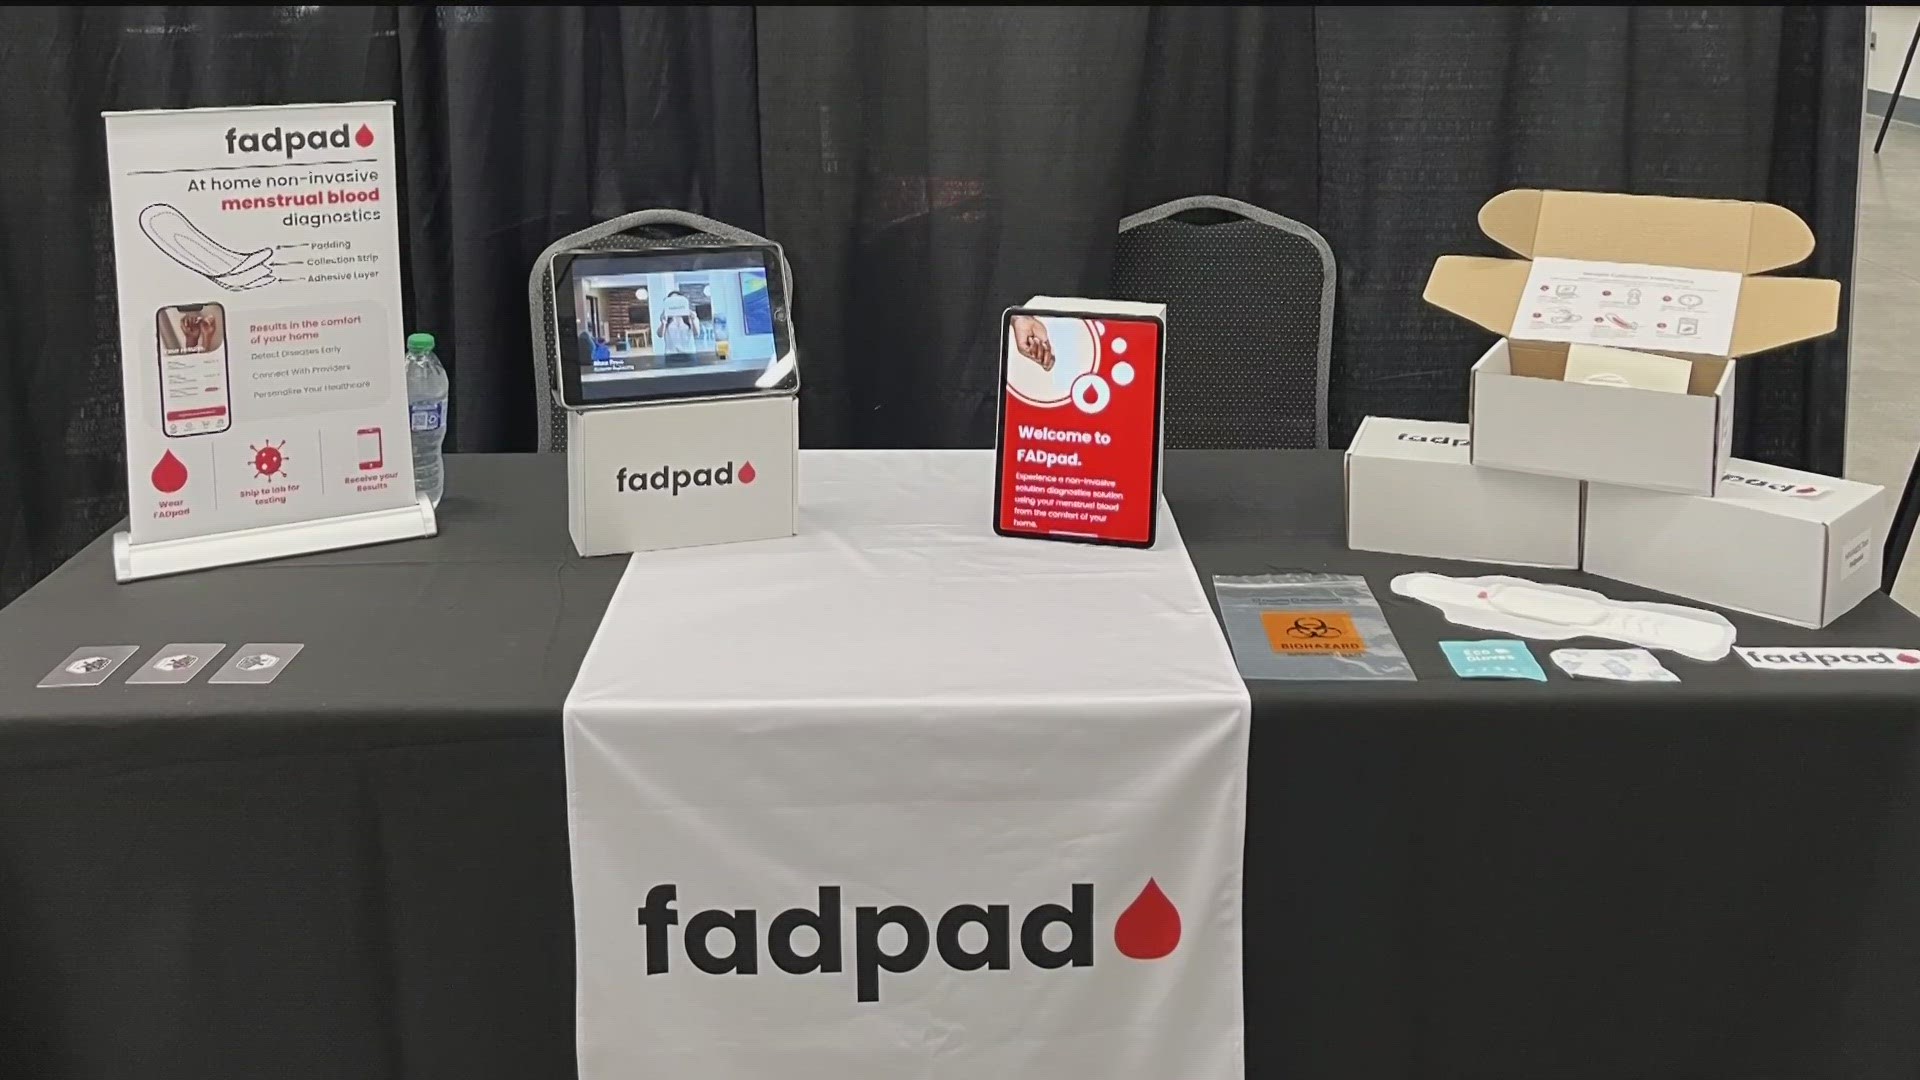 The invention team at Georgia Tech said they created the Fadpad - as a way to test for diseases and ultimately prevent deaths.